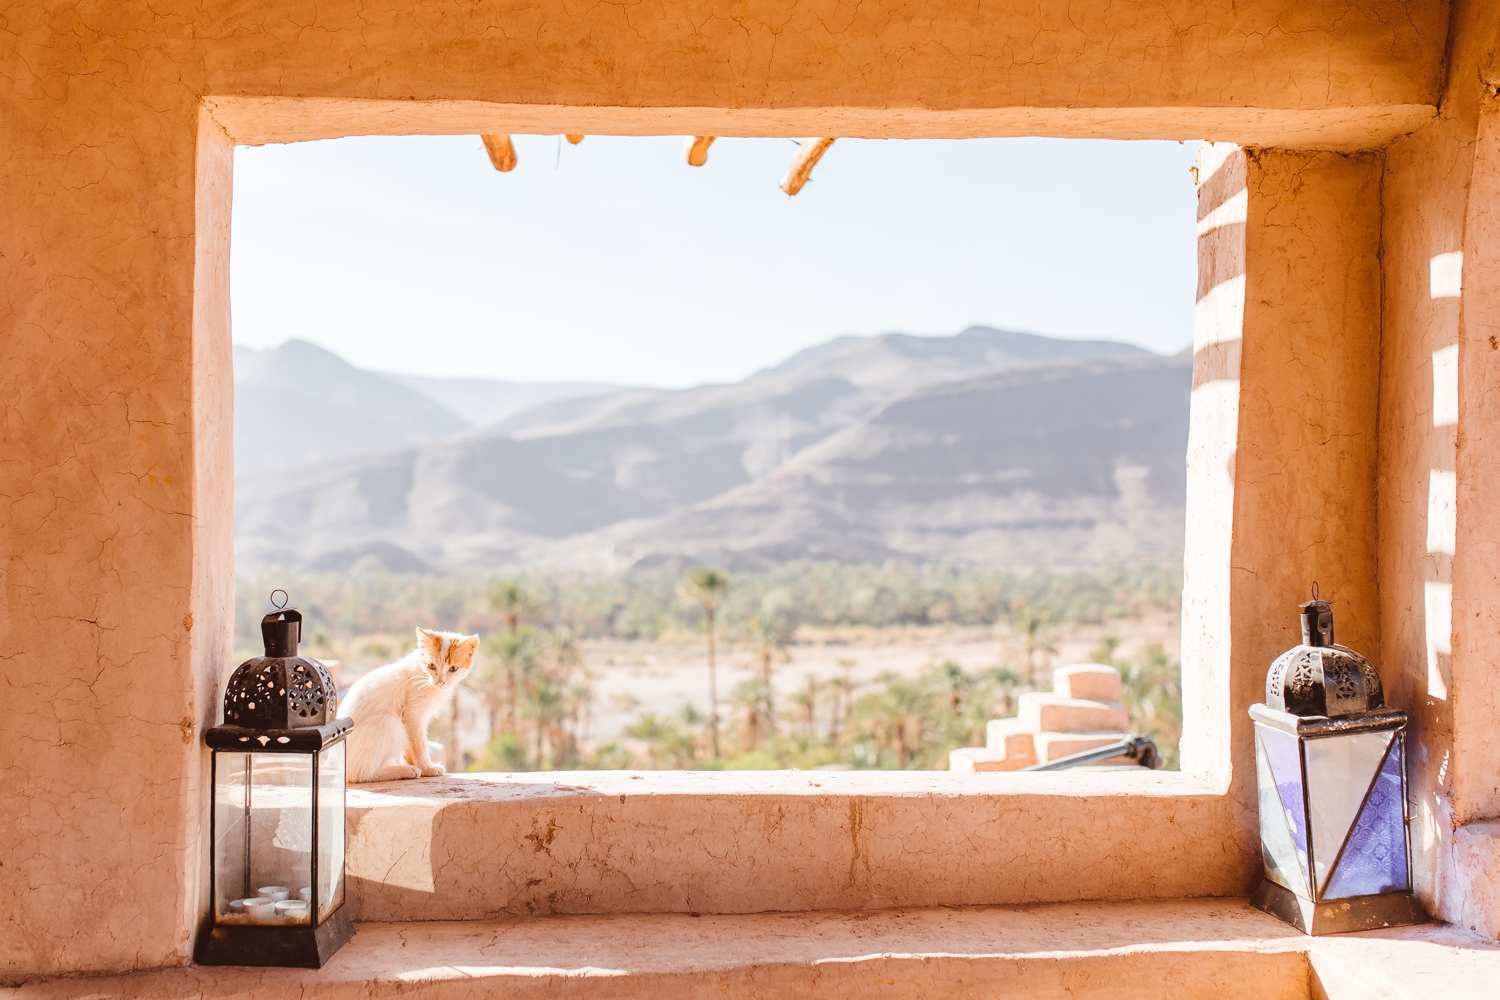 Cat sitting on window sill in Kusbah, Morocco | Brooke Michelle Photography